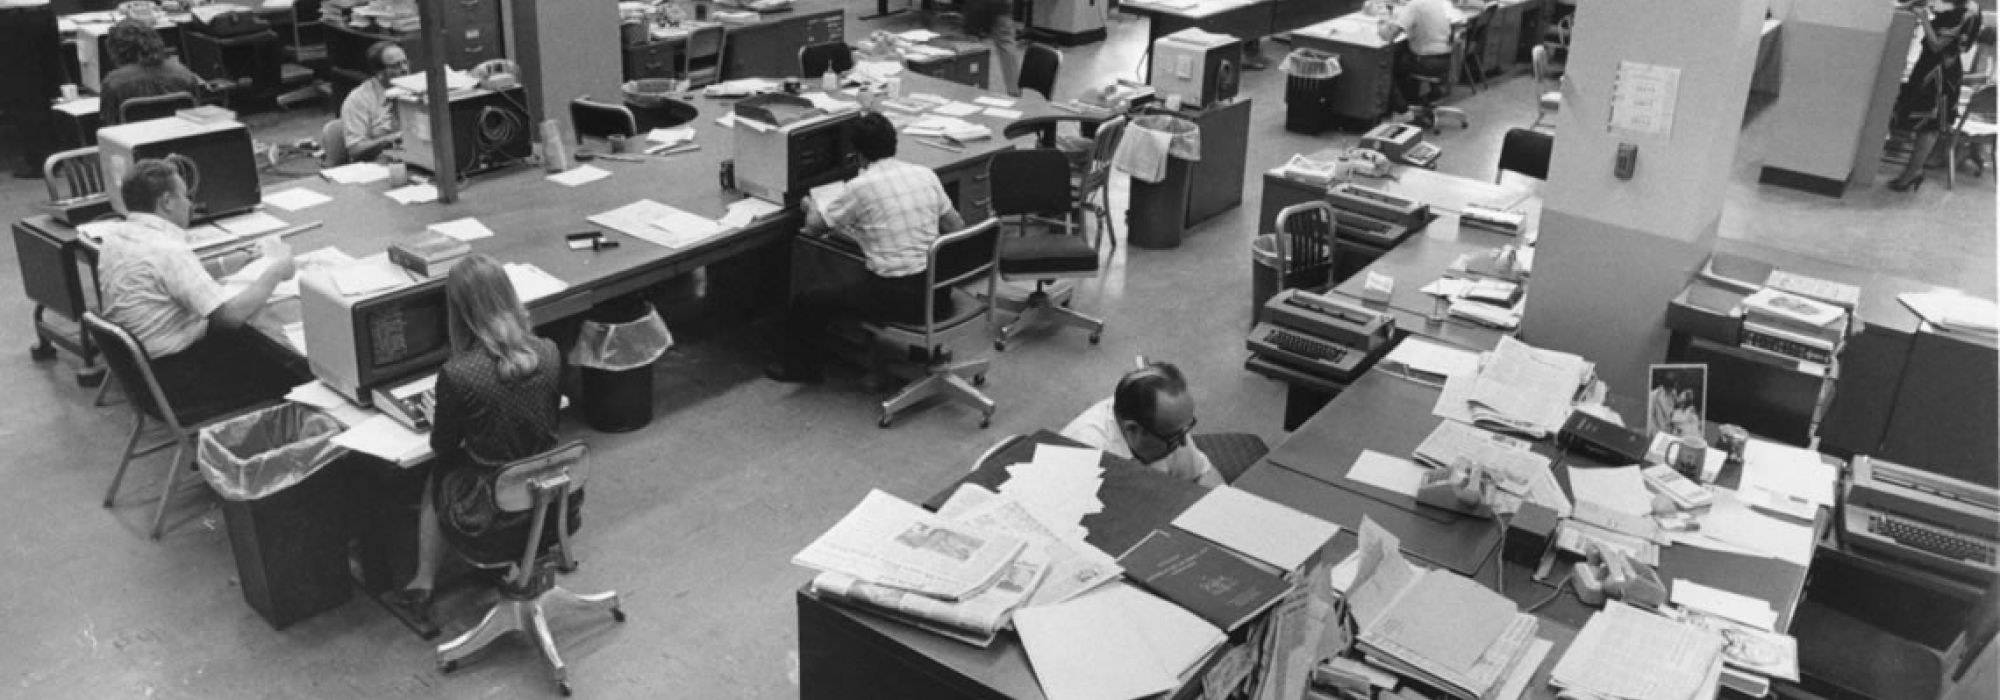 Black and white image shows an old newspaper newsroom with reporters surrounded by stacks of papers, sitting at old swiveling desk chairs, working at 1970s era computers.